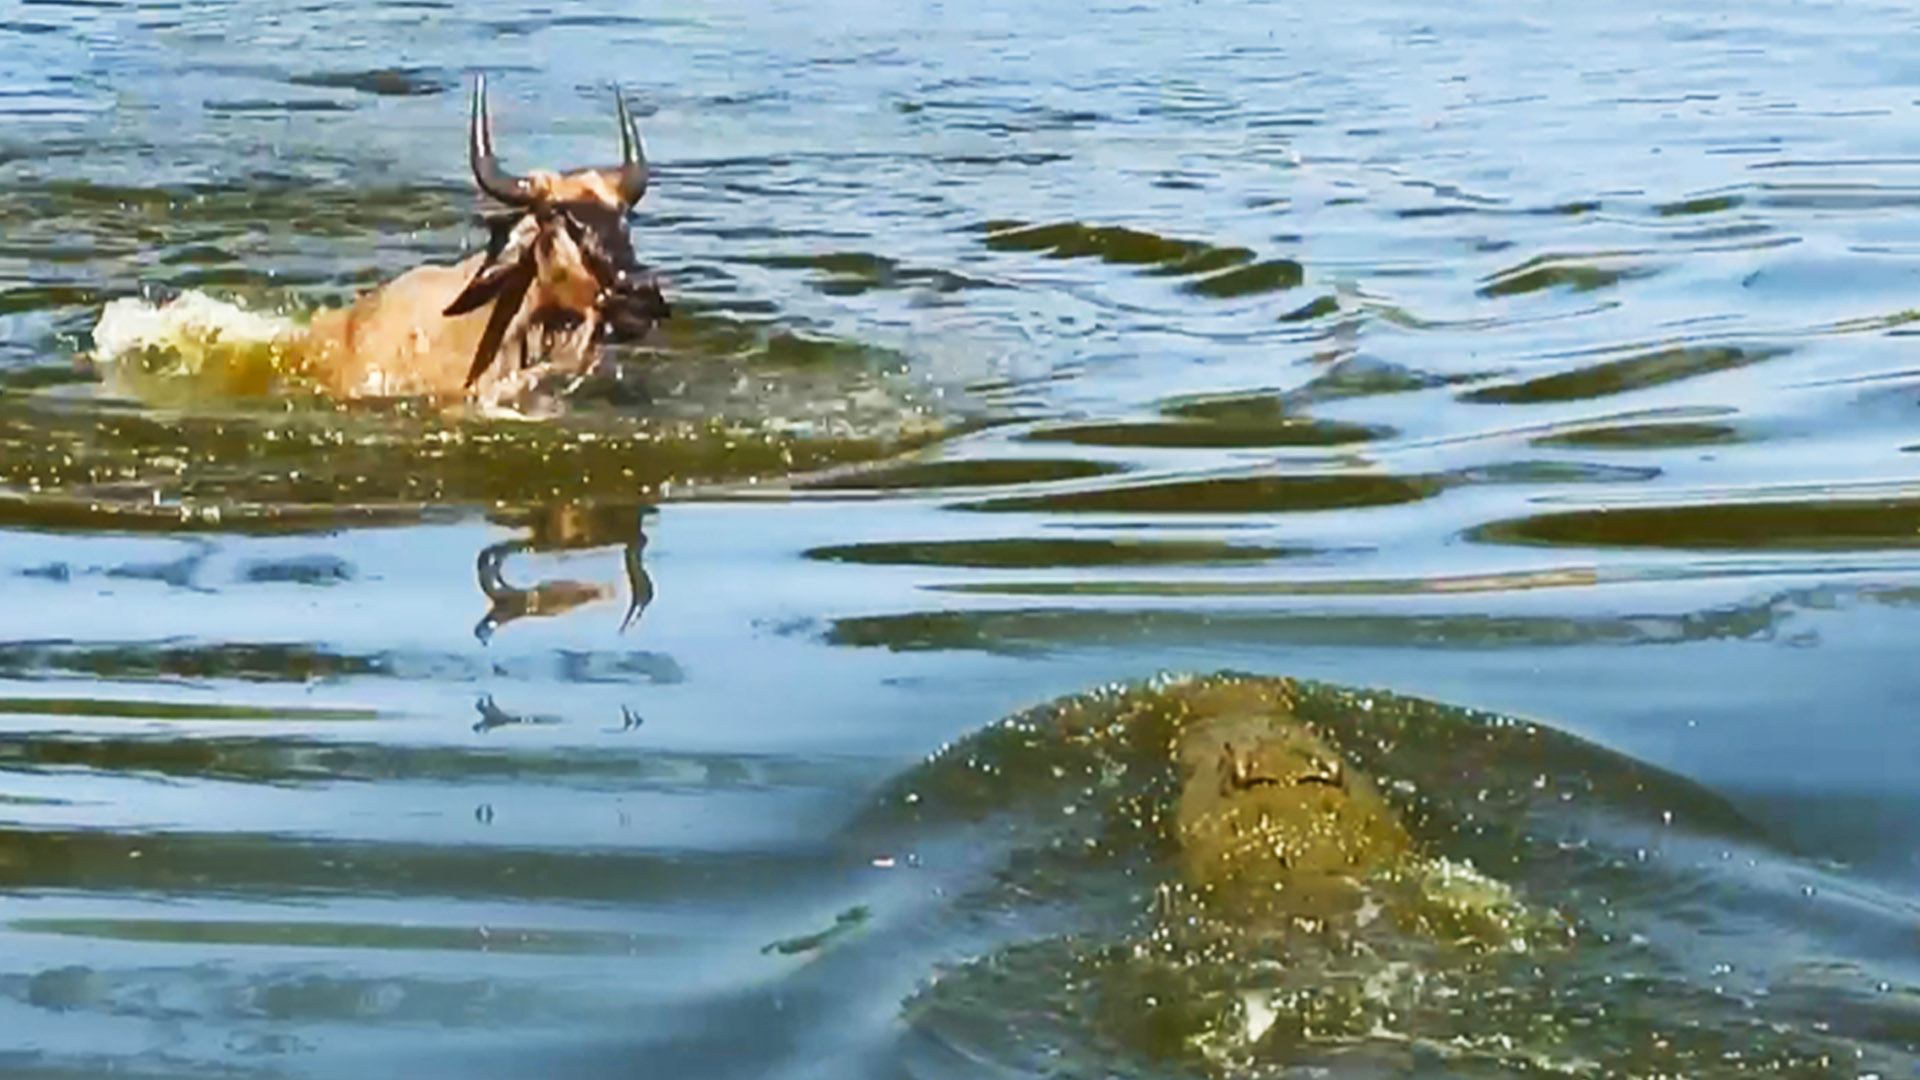 Wildebeest Escapes Small Croc to Swim into Jaws of Monster Croc